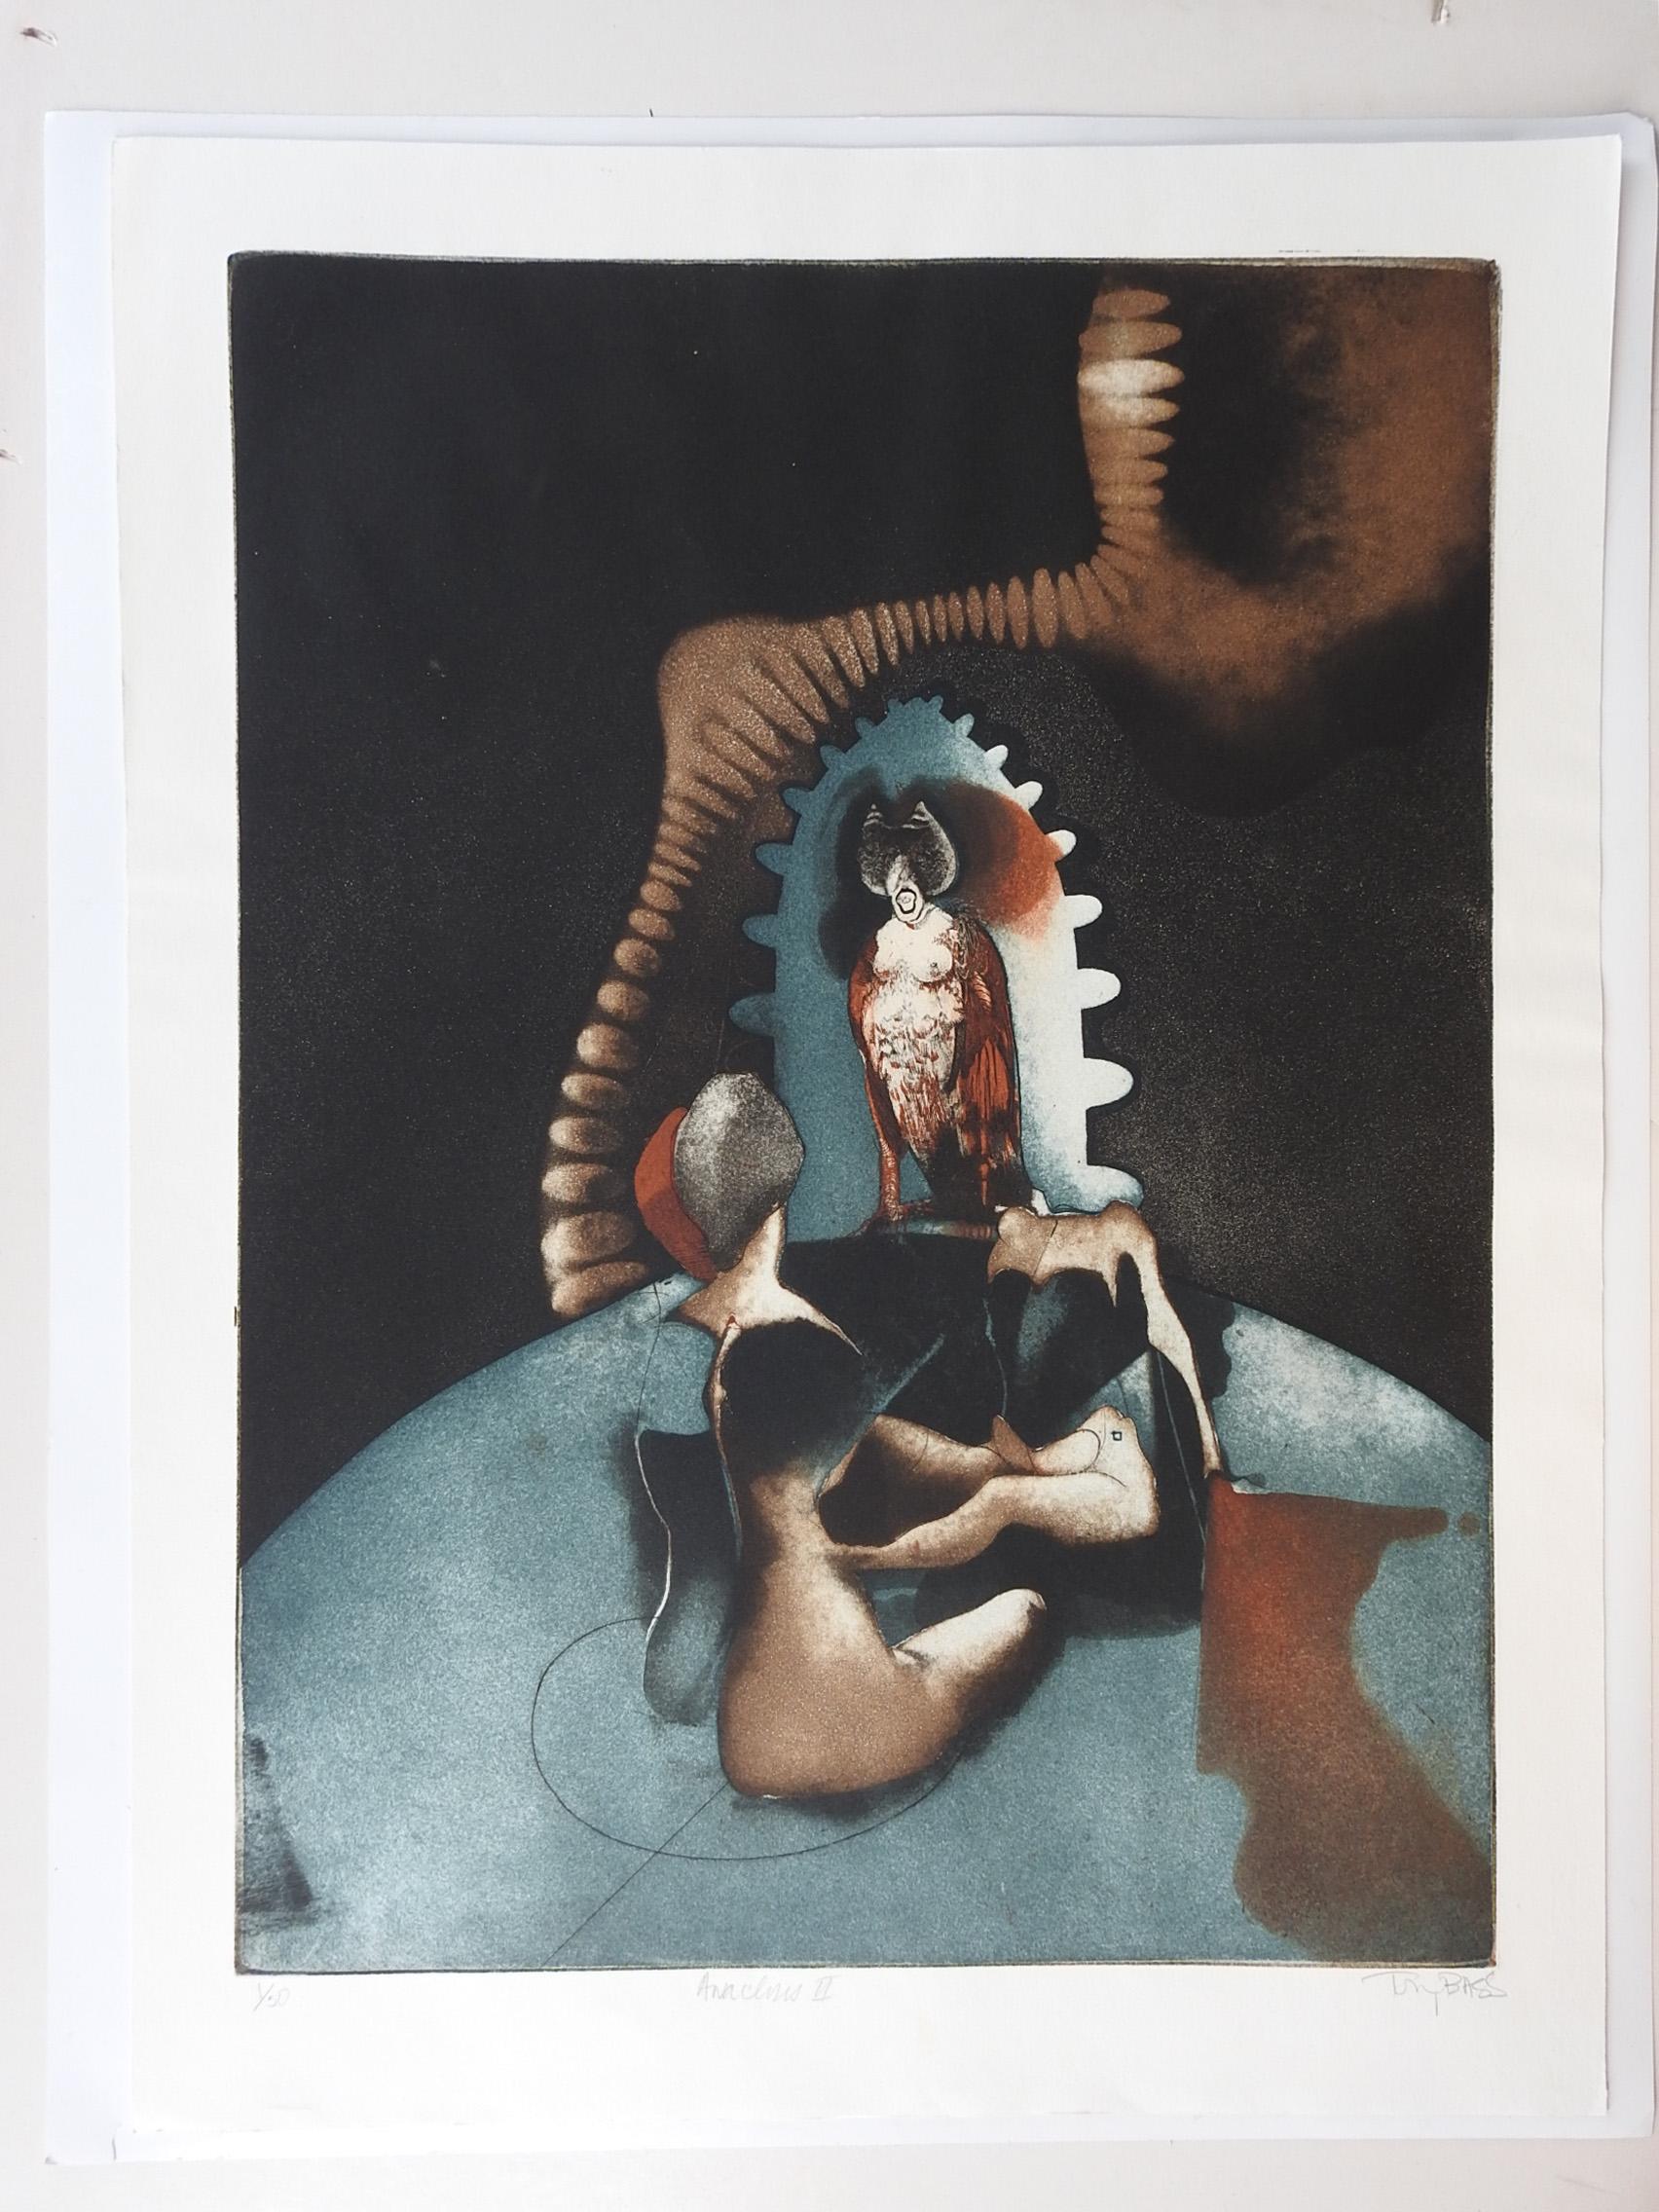 Circa 1970's abstract color etching on paper by Tony Bass ( b.1943) Texas. Signed, titled Anaclisis II and numbered 1/50 in pencil along lower margin. Abstract surreal figures in blue and black. Unframed.